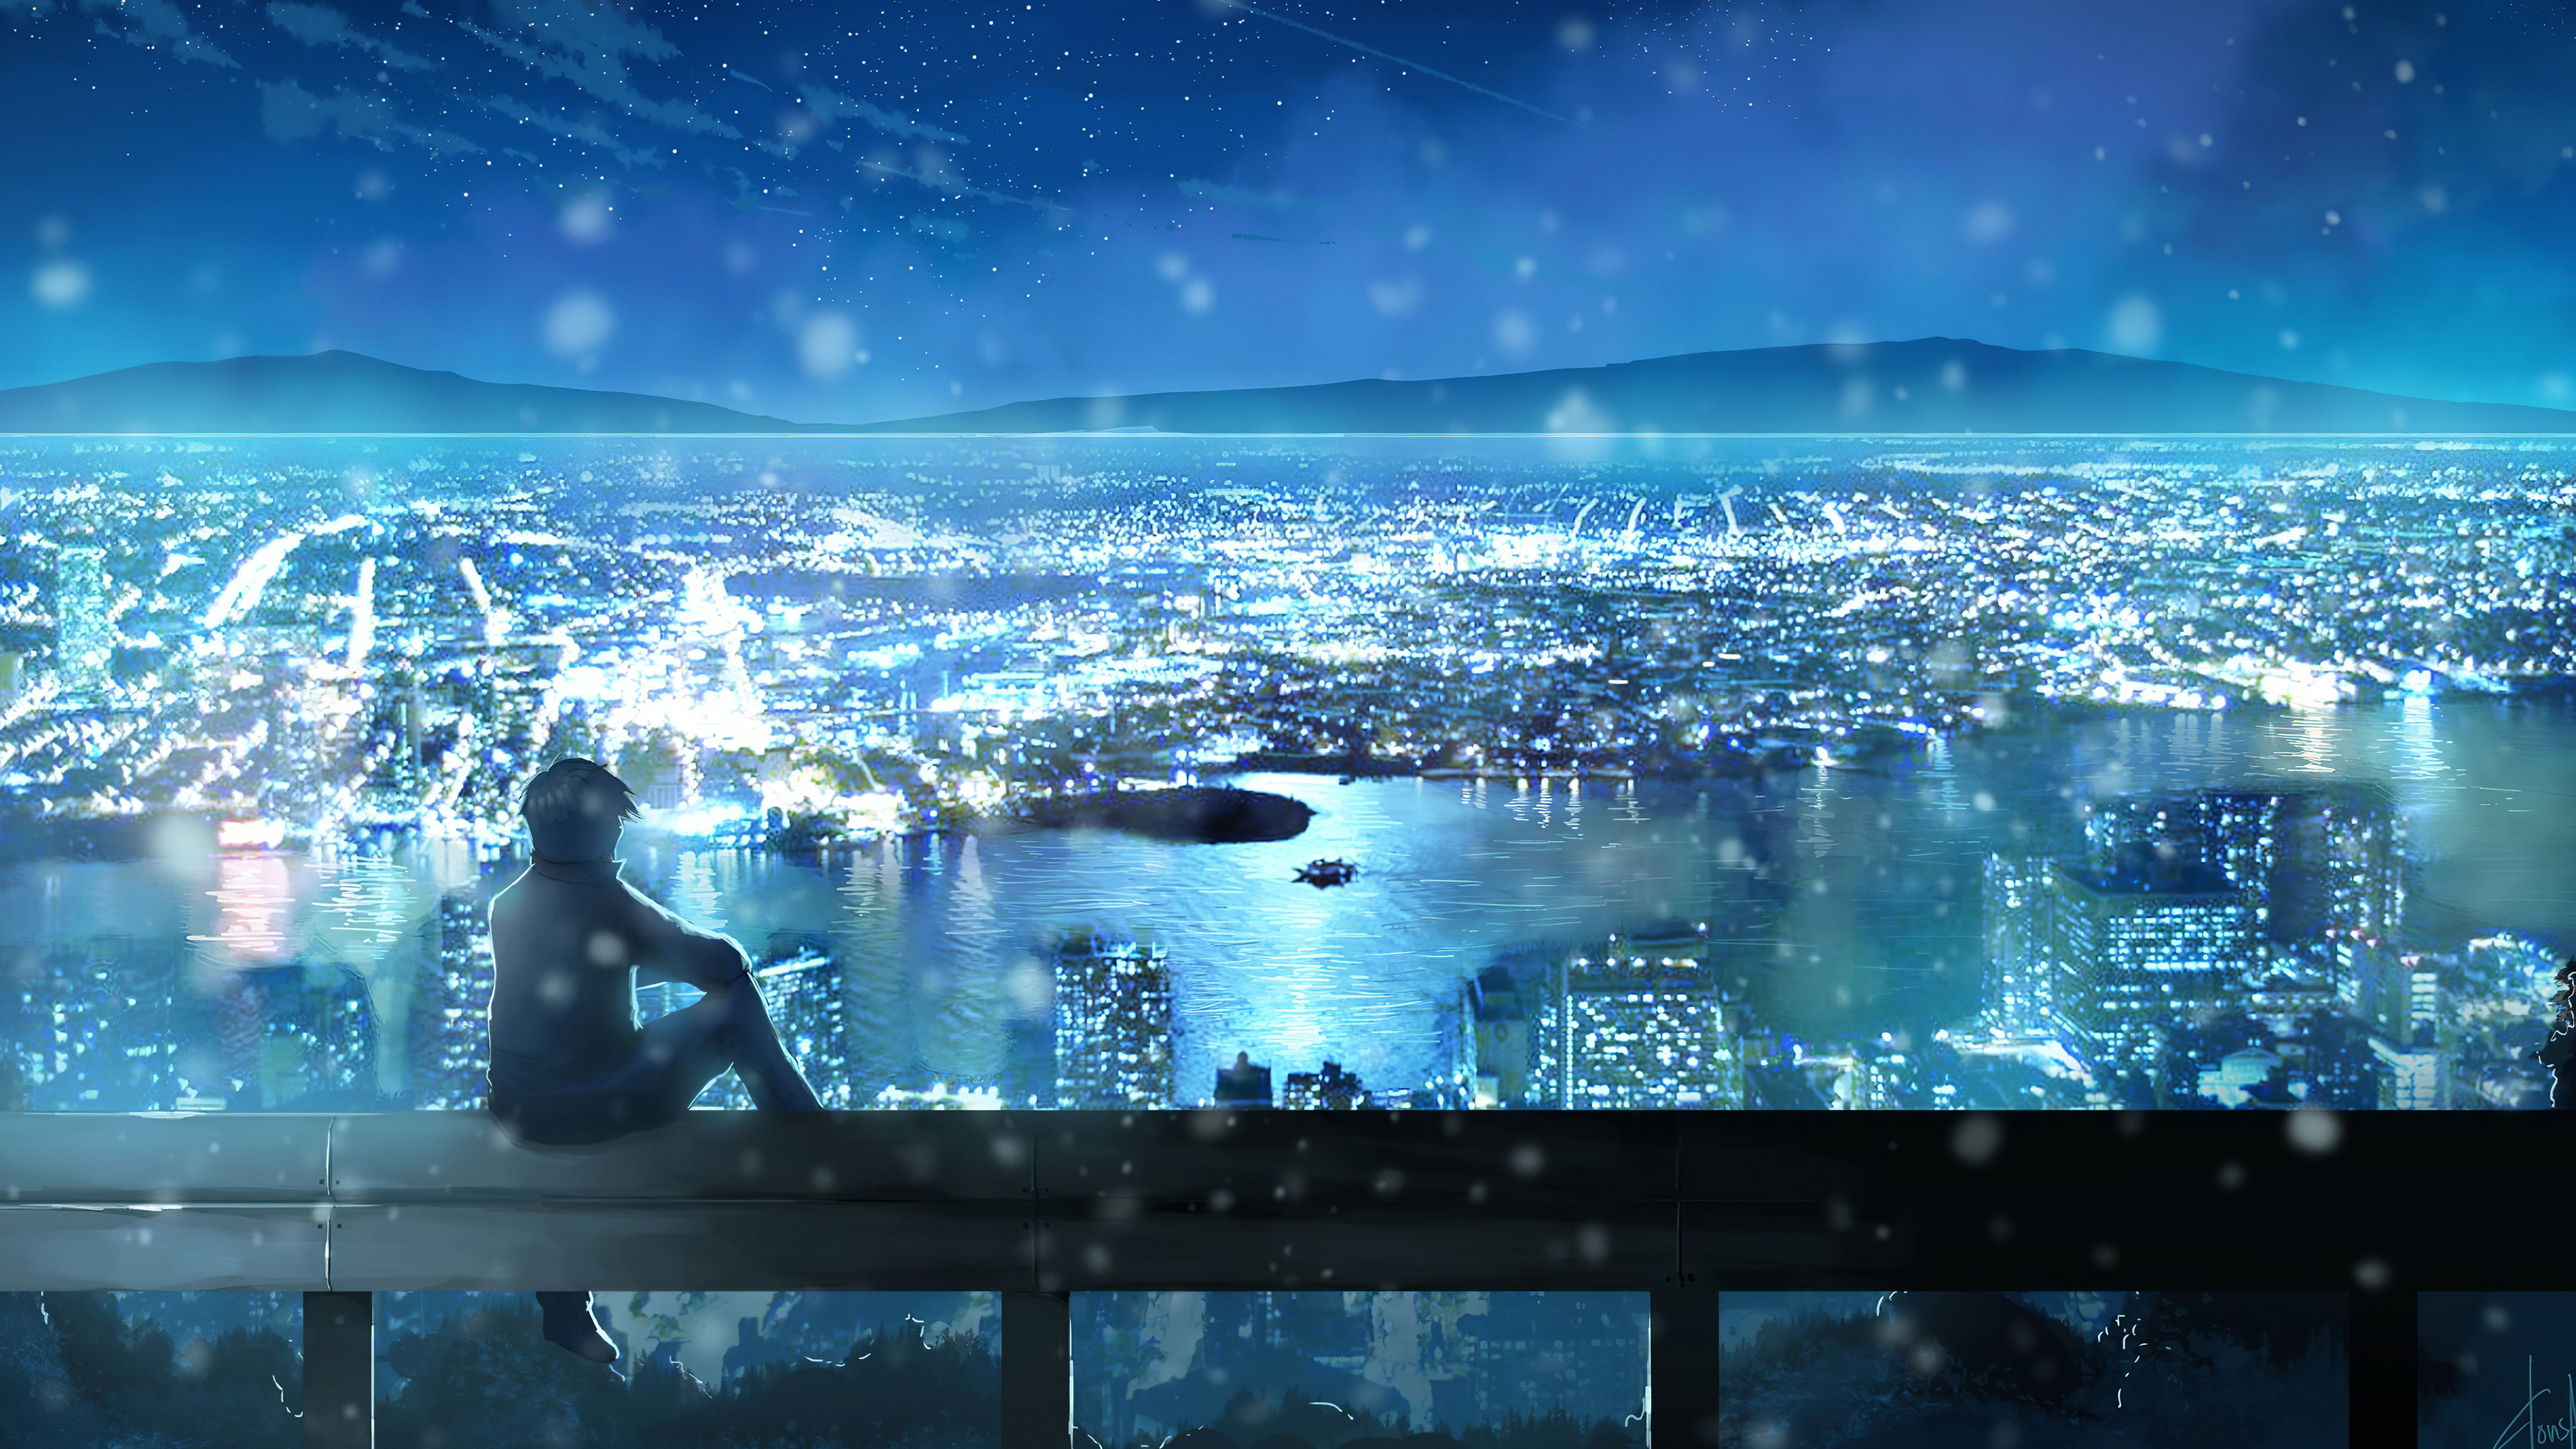 Anime Landscape Stock Photos, Images and Backgrounds for Free Download